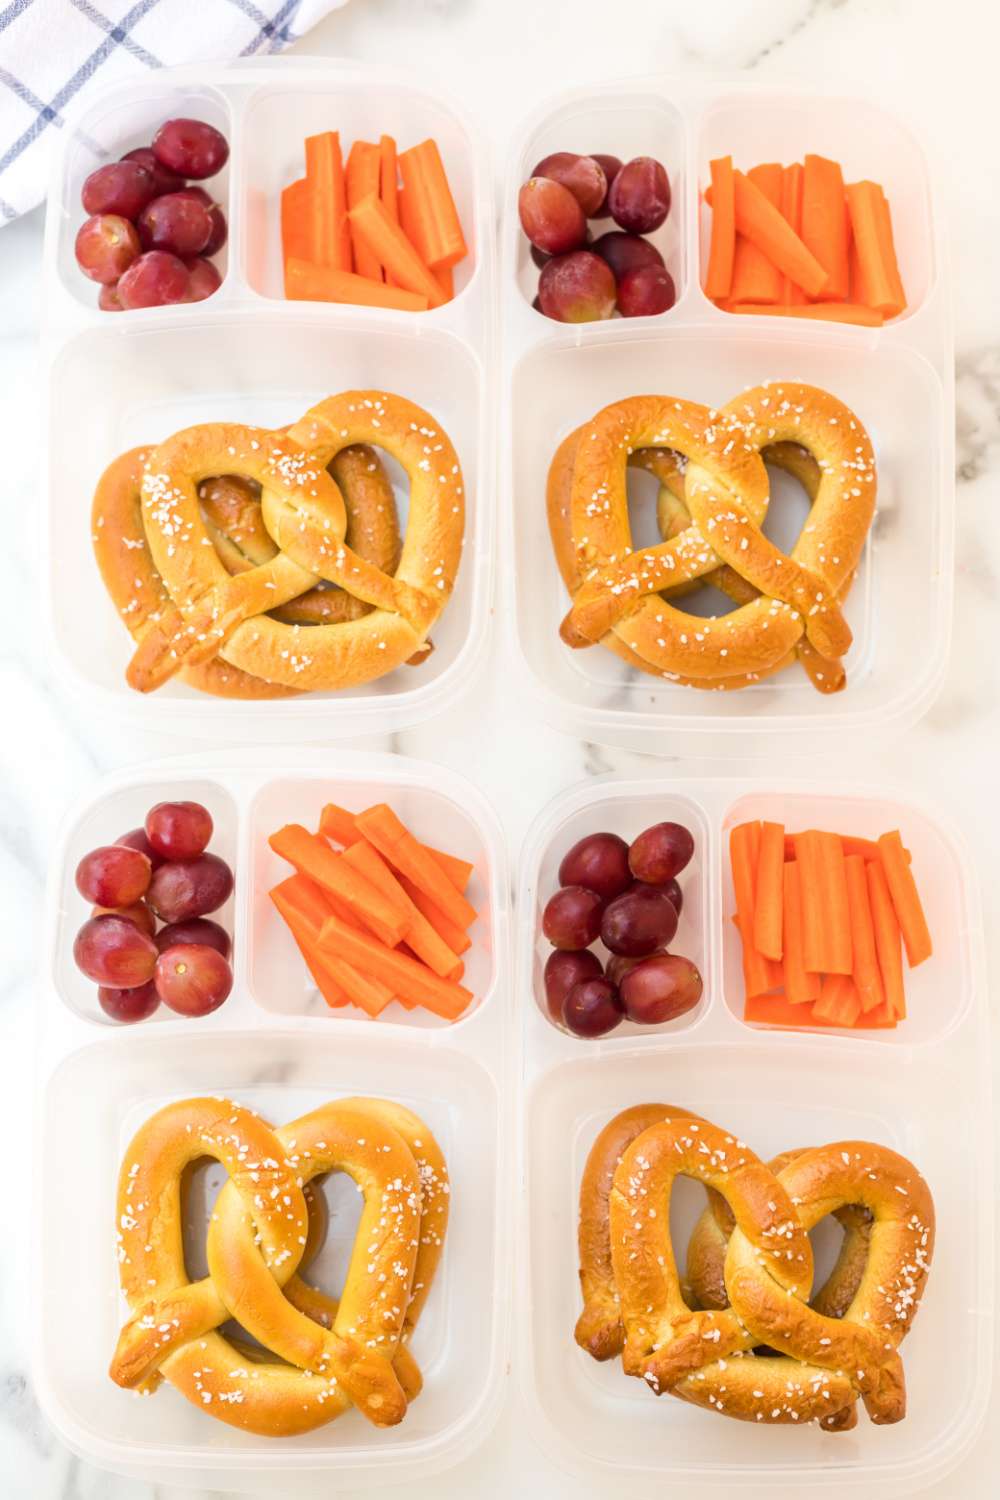 This Soft Pretzel Easy Lunchbox Idea is a great idea for a light school lunch, after school snack box that both kids and adults will love. via @familyfresh